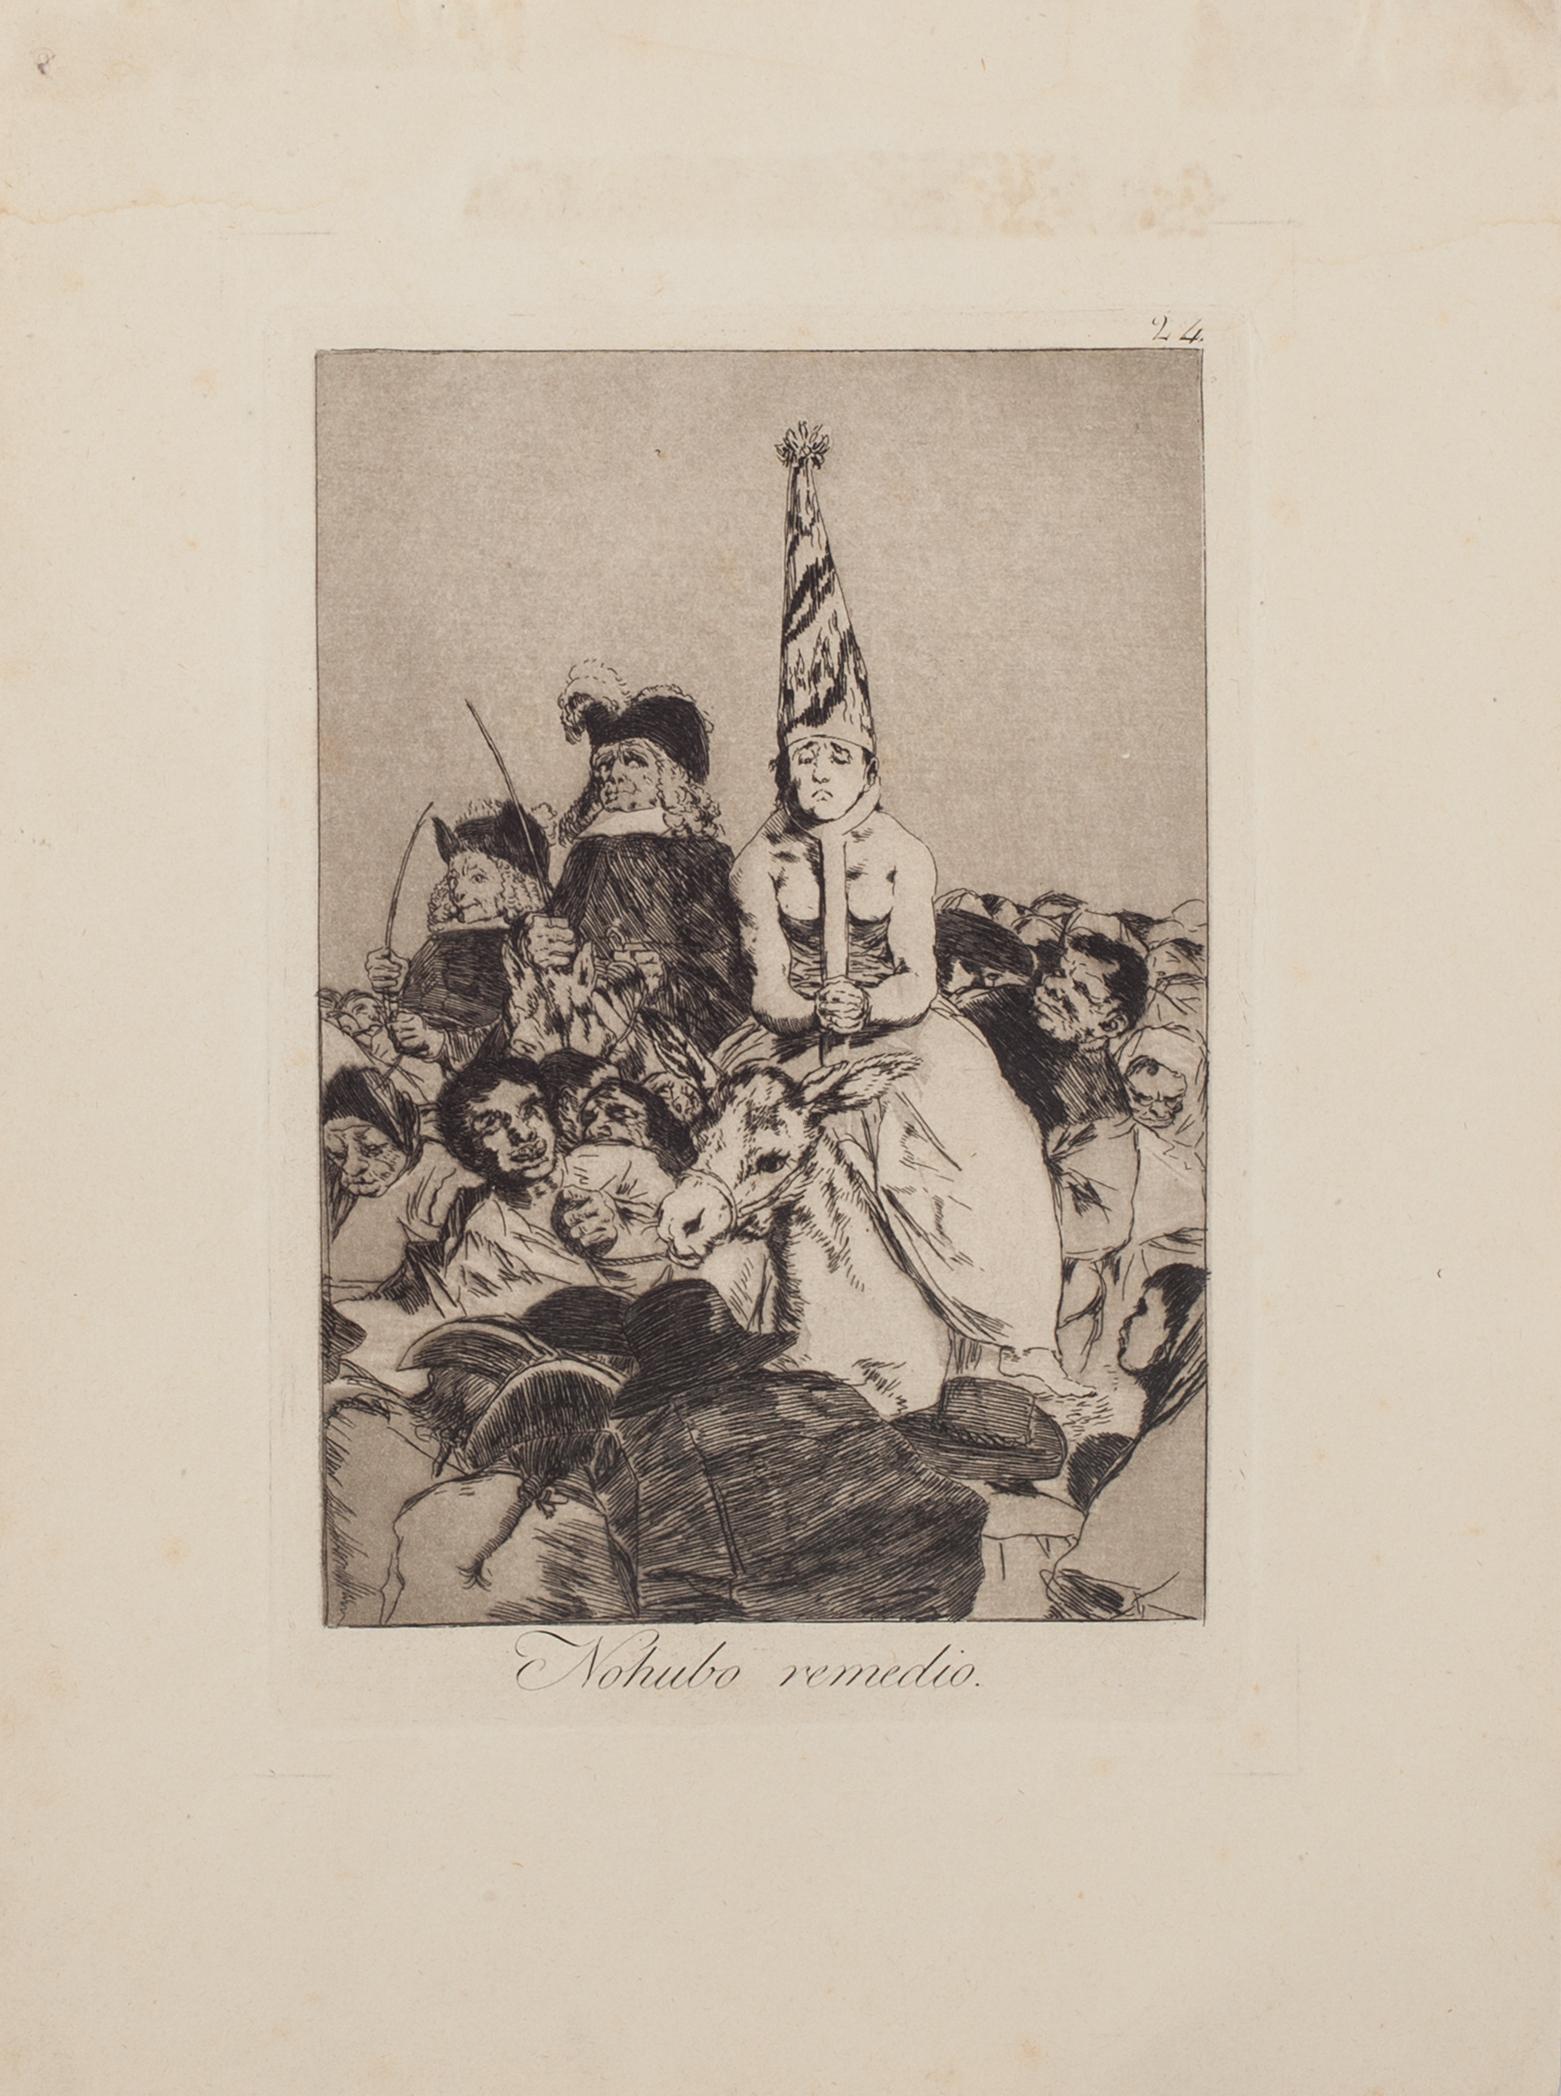 No Hubo Remedio is an original artwork realized by the artist Francisco Goya and published for the first time in 1799.

Original Etching on wove paper. Image dimensions: 21.5 x 15 cm.

The etching is part of the Third Edition of 